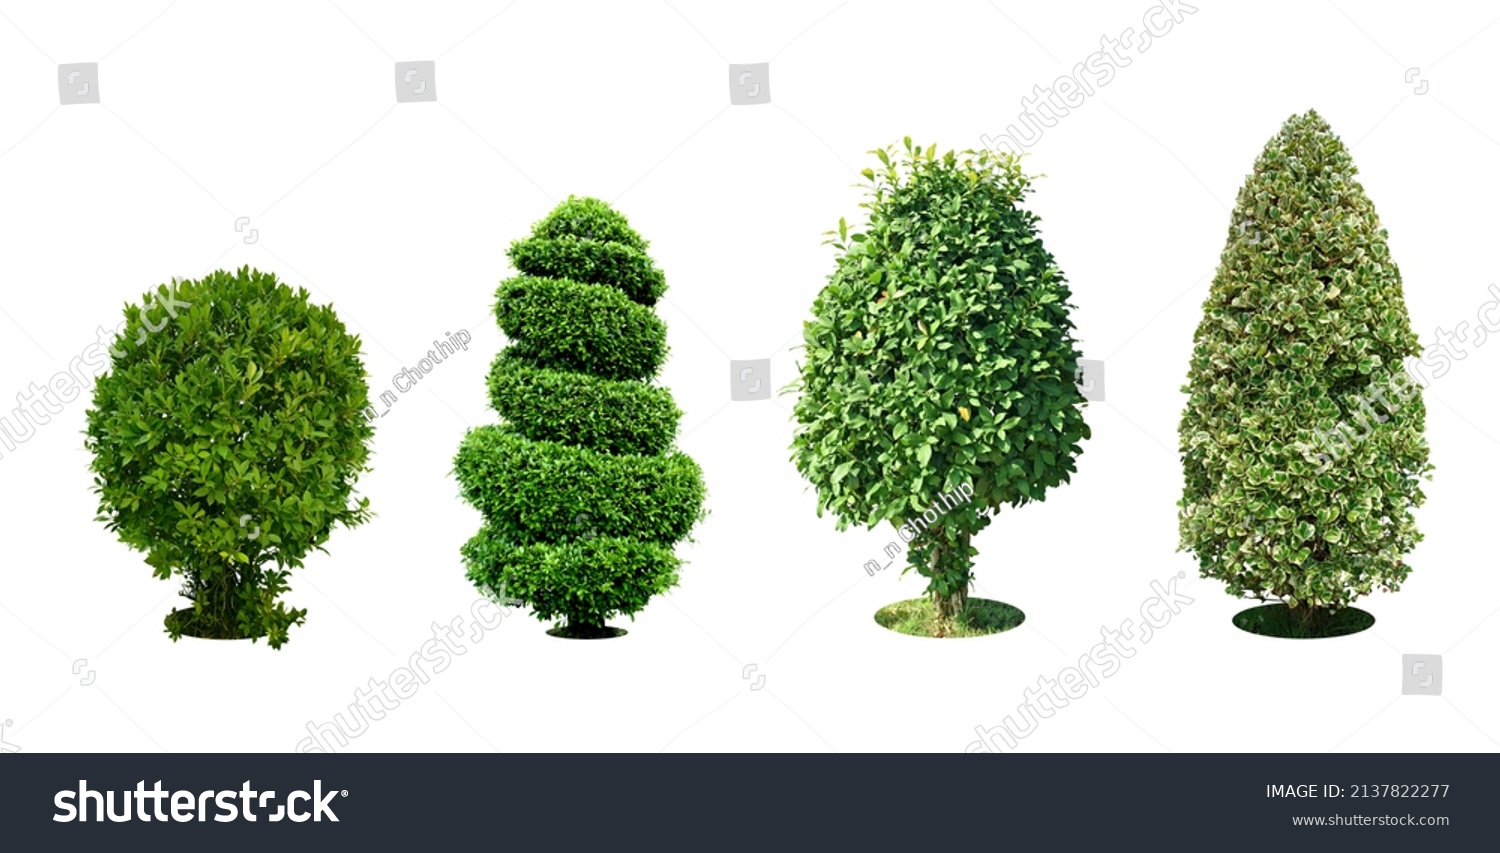 Bush, Dwarf trees, ornamental trees, shrubs.,
Siamese rough bush, pruning tree for garden decoration. 
Total of 4
Isolated on white background and clipping path. #2137822277